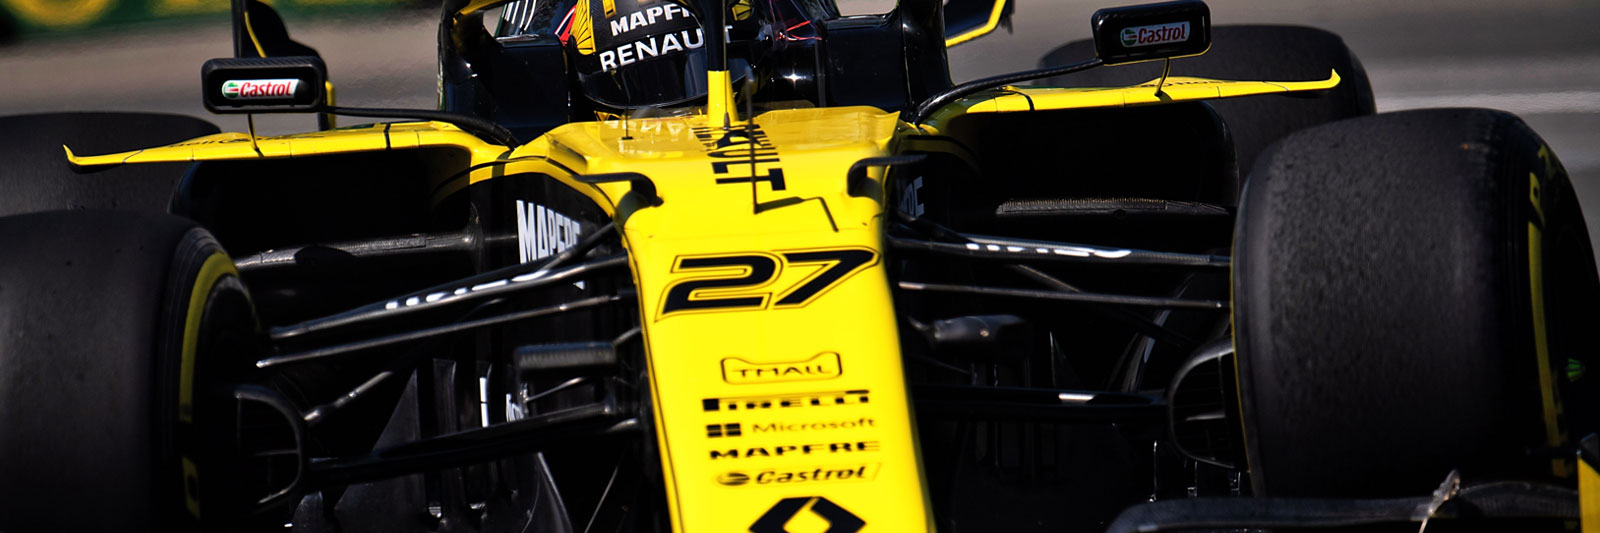 Renault F1 Team suite Tickets from Grand Prix Tours